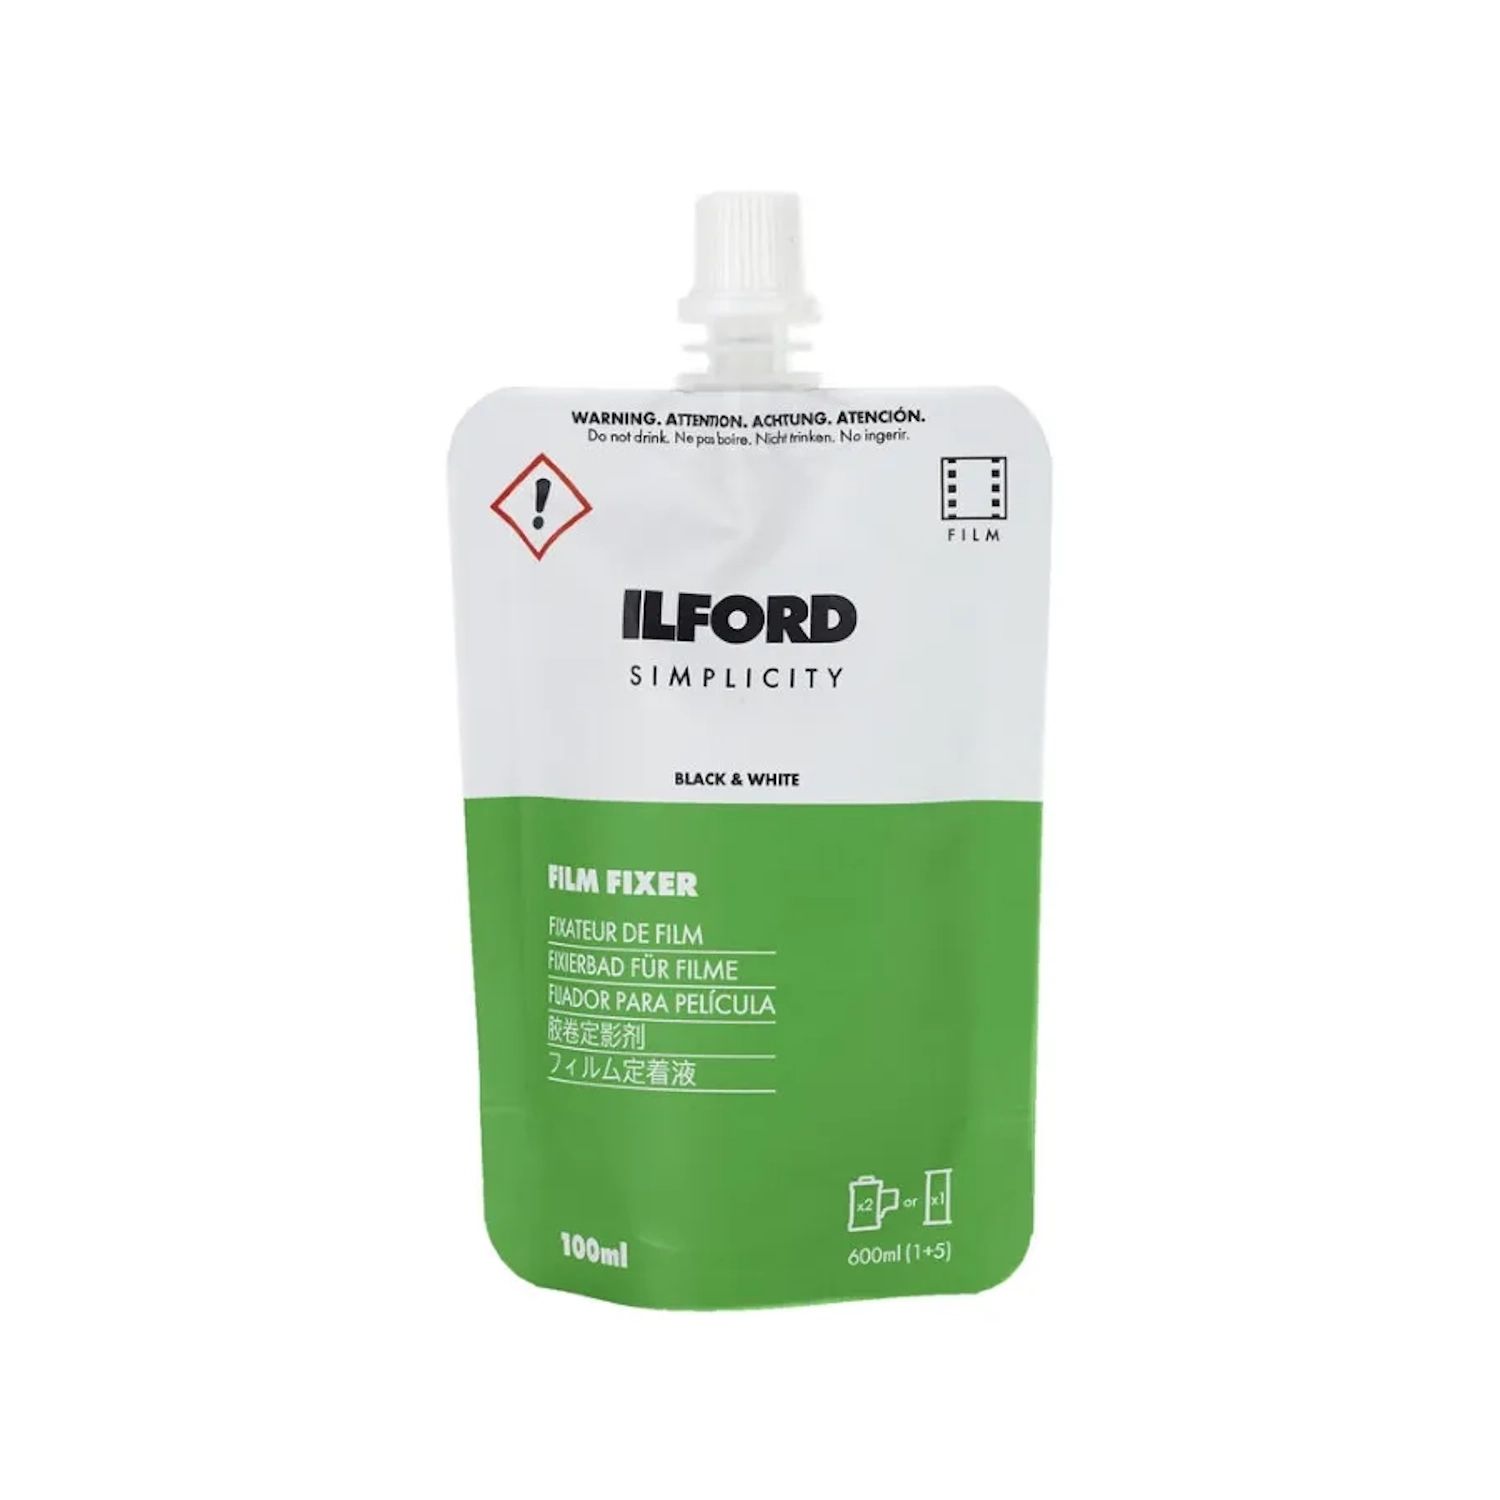 Ilford Simplicity Film Fixer (12-Pack)